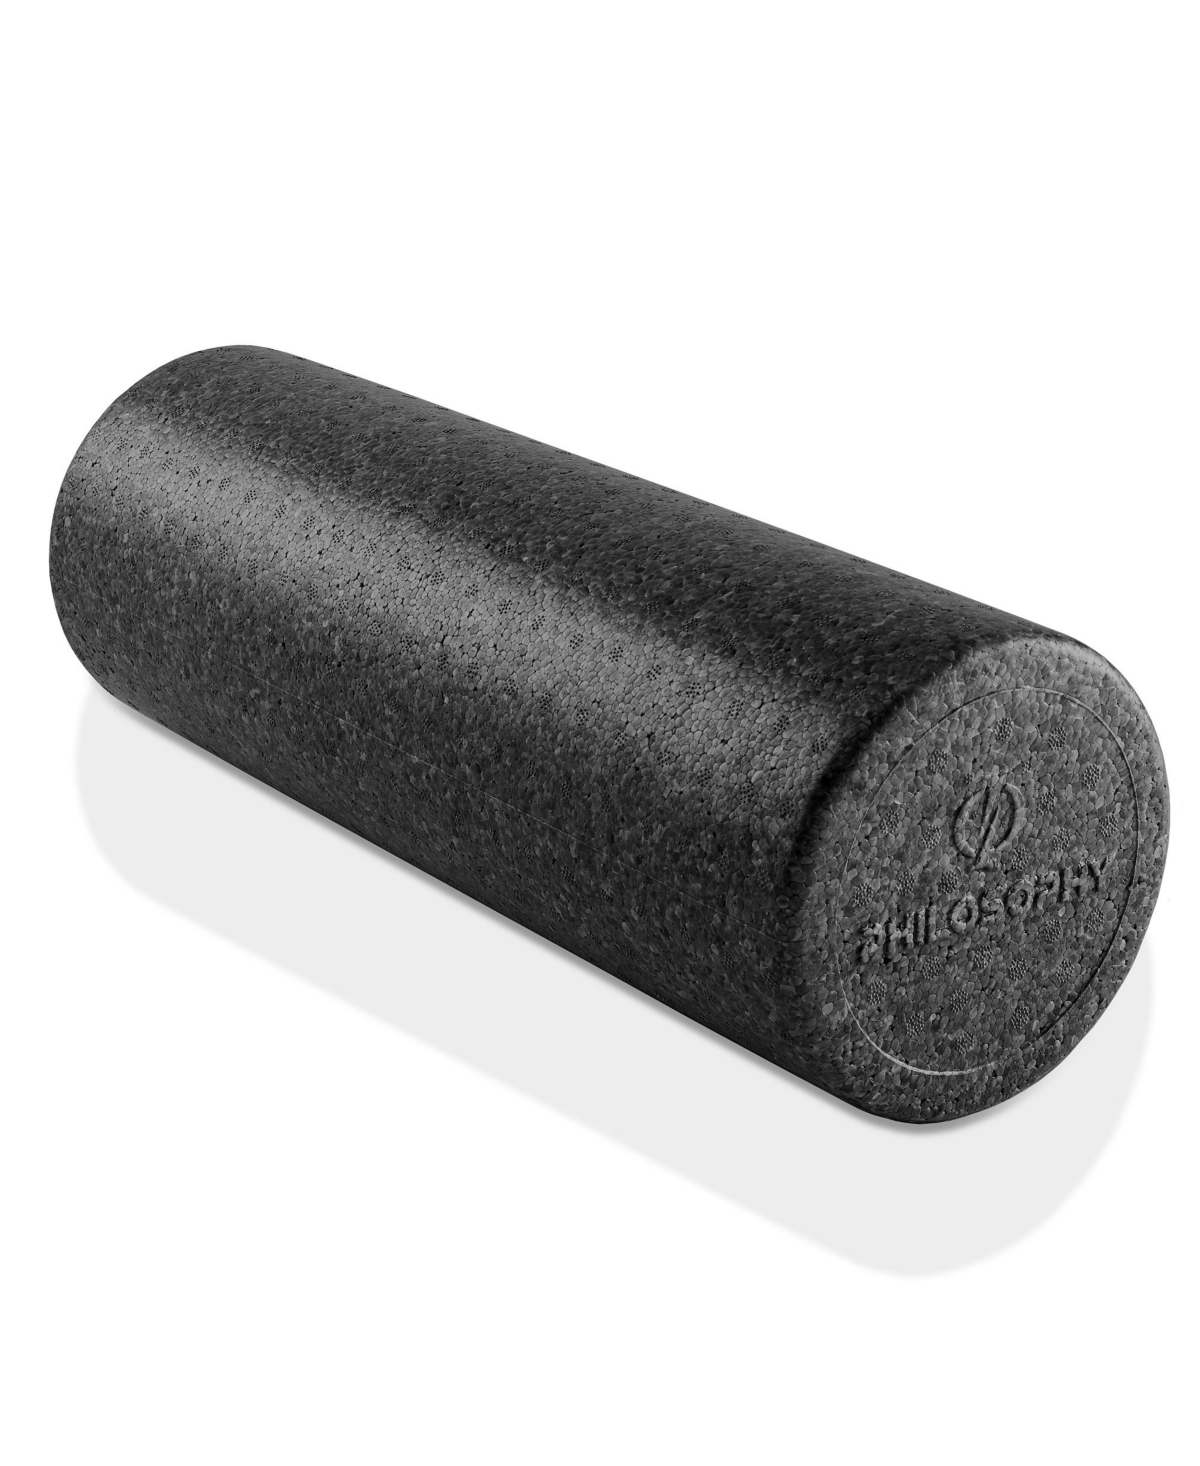 18" High-Density Foam Roller for Exercise, Massage, Muscle Recovery - Round, Black - Black